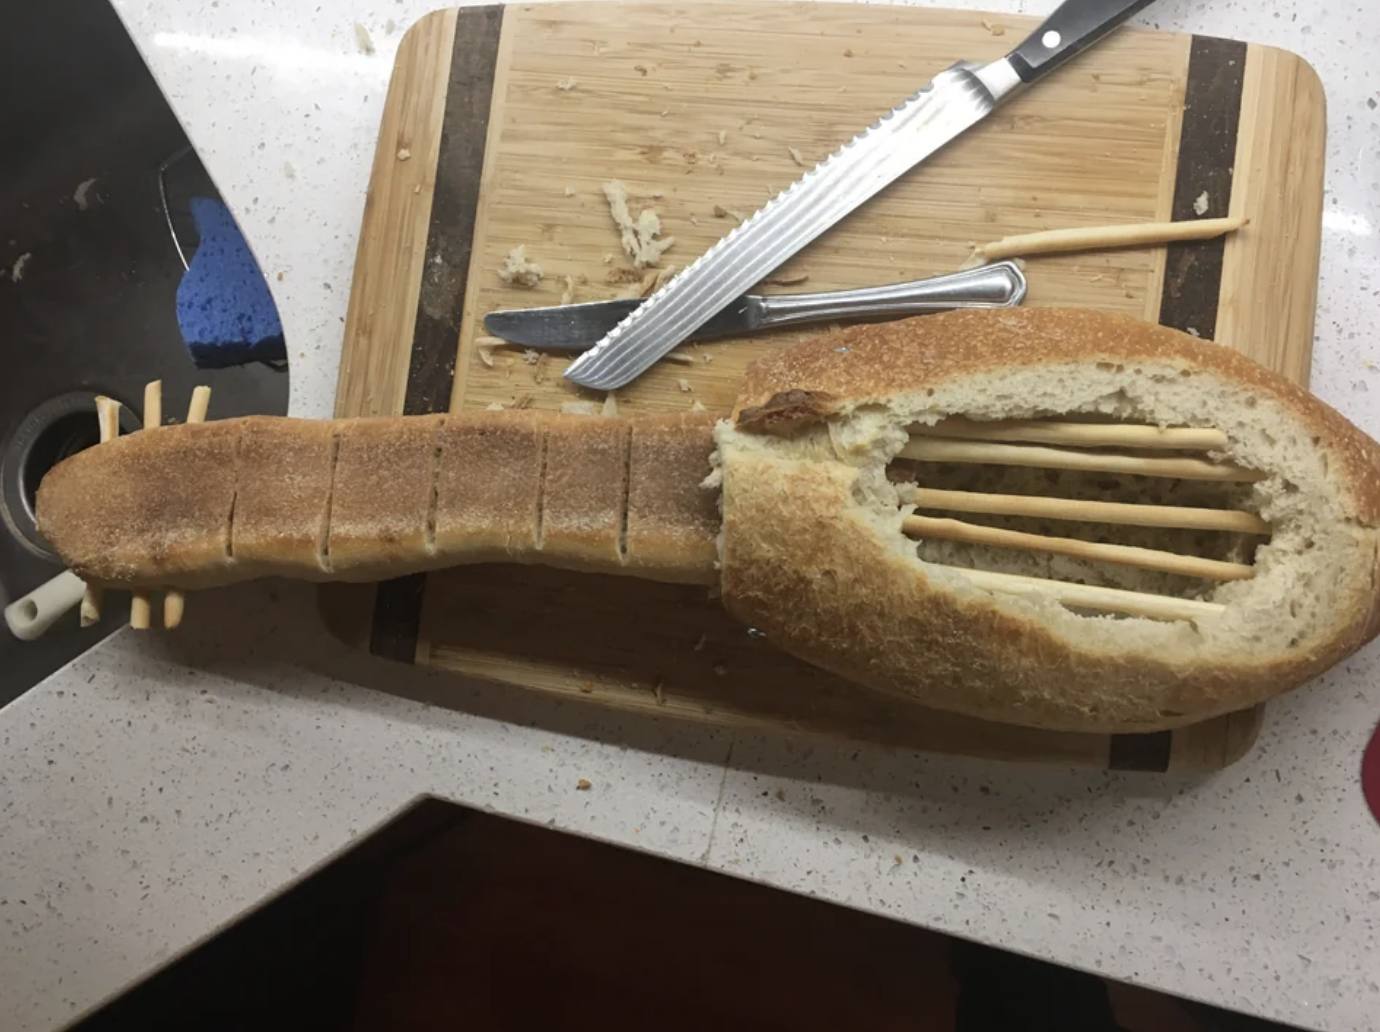 loaf of bread in the shape of a guitar